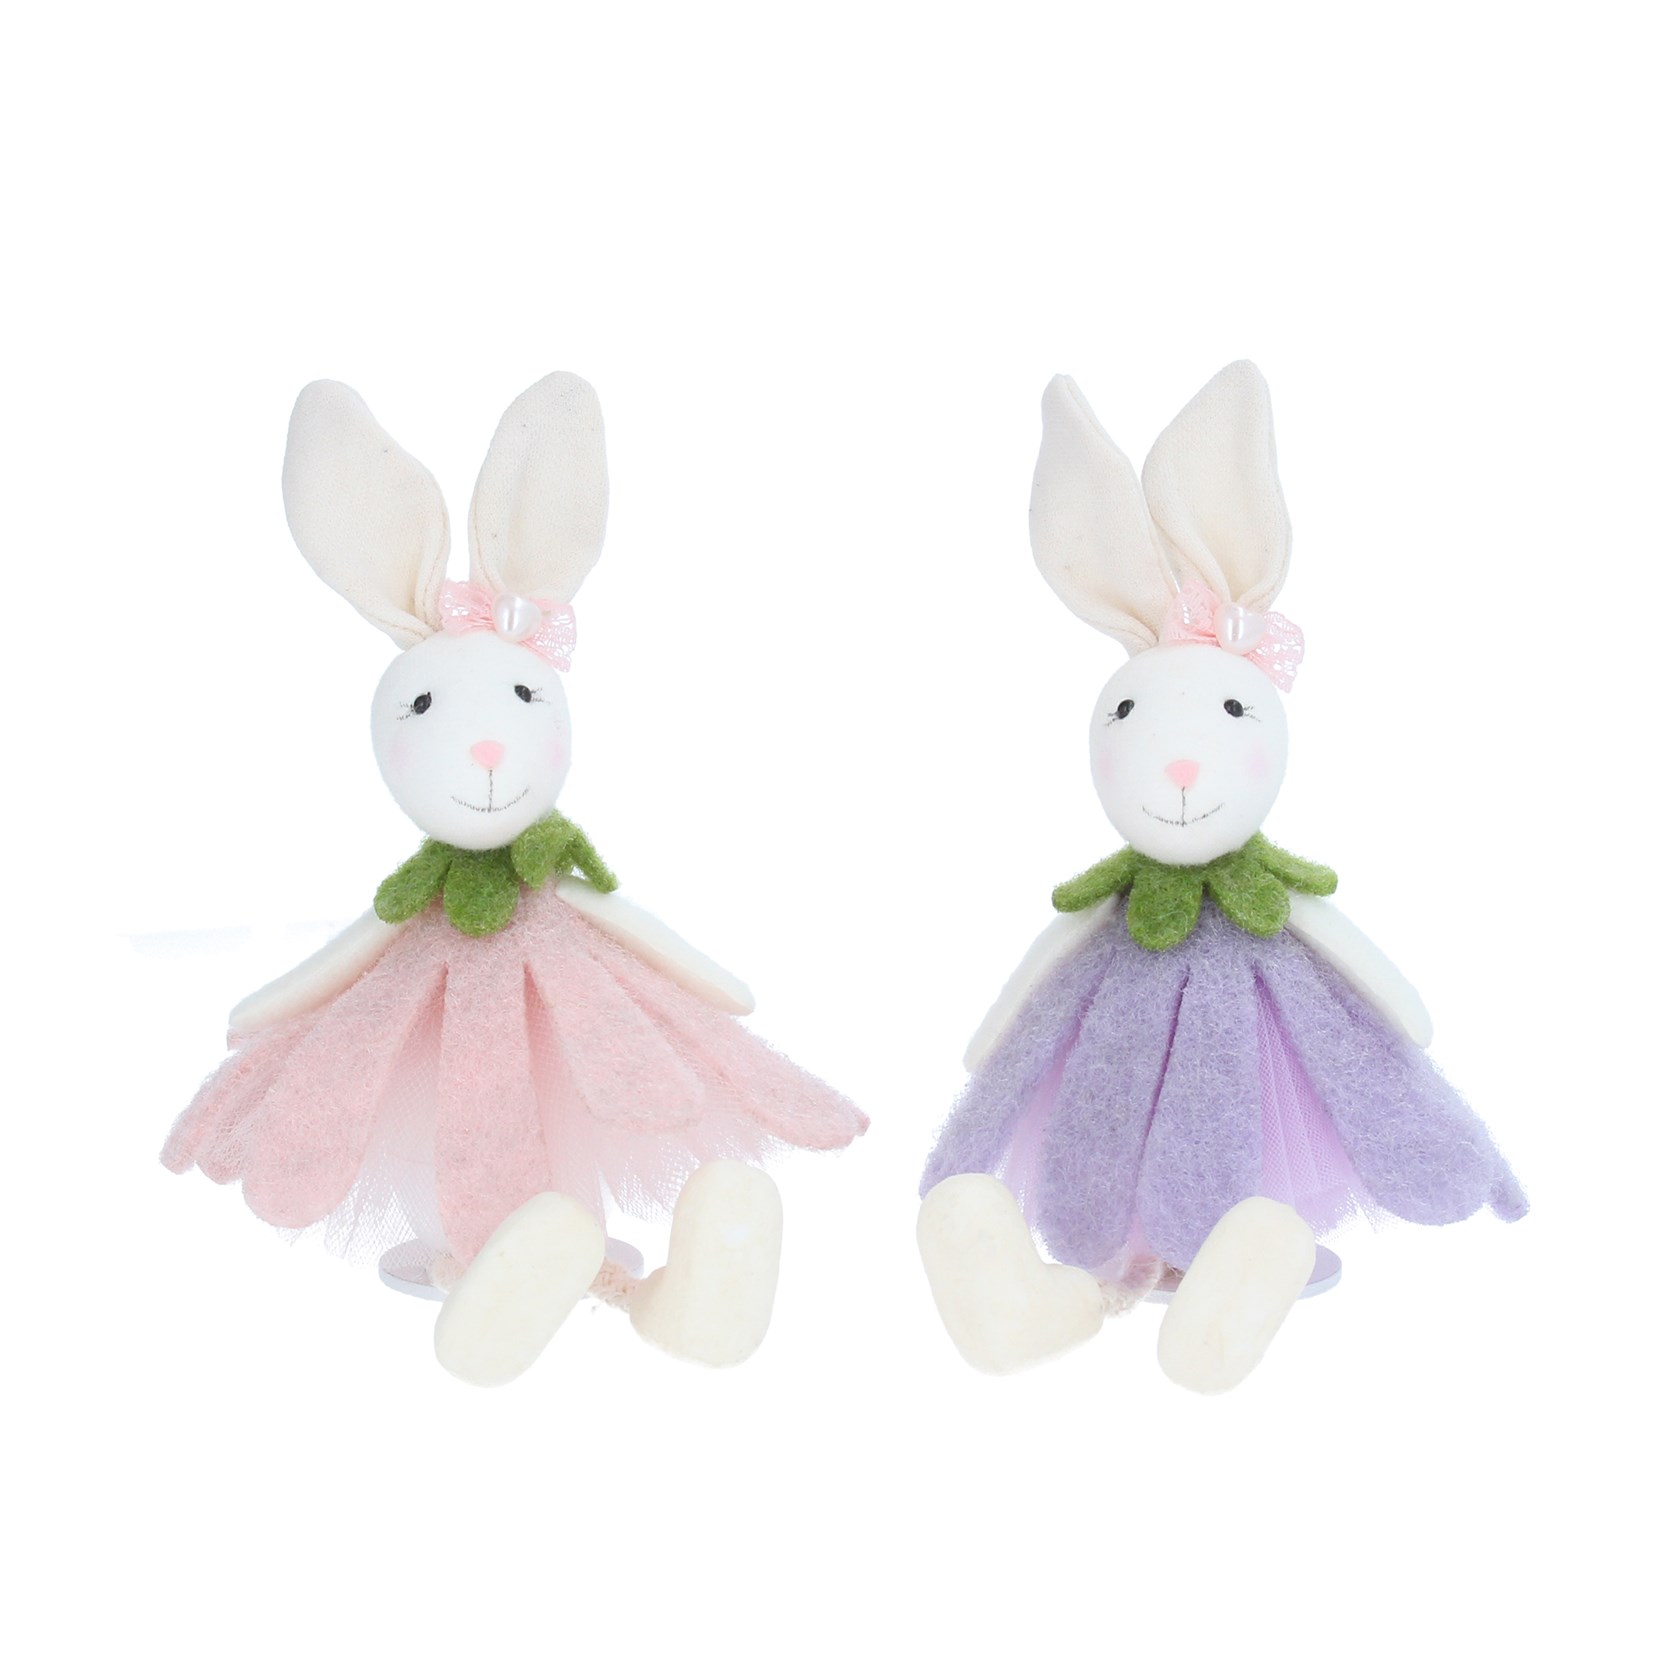 Gisela Graham Pair of Floral Rabbits with Dangling Legs Easter Decorations